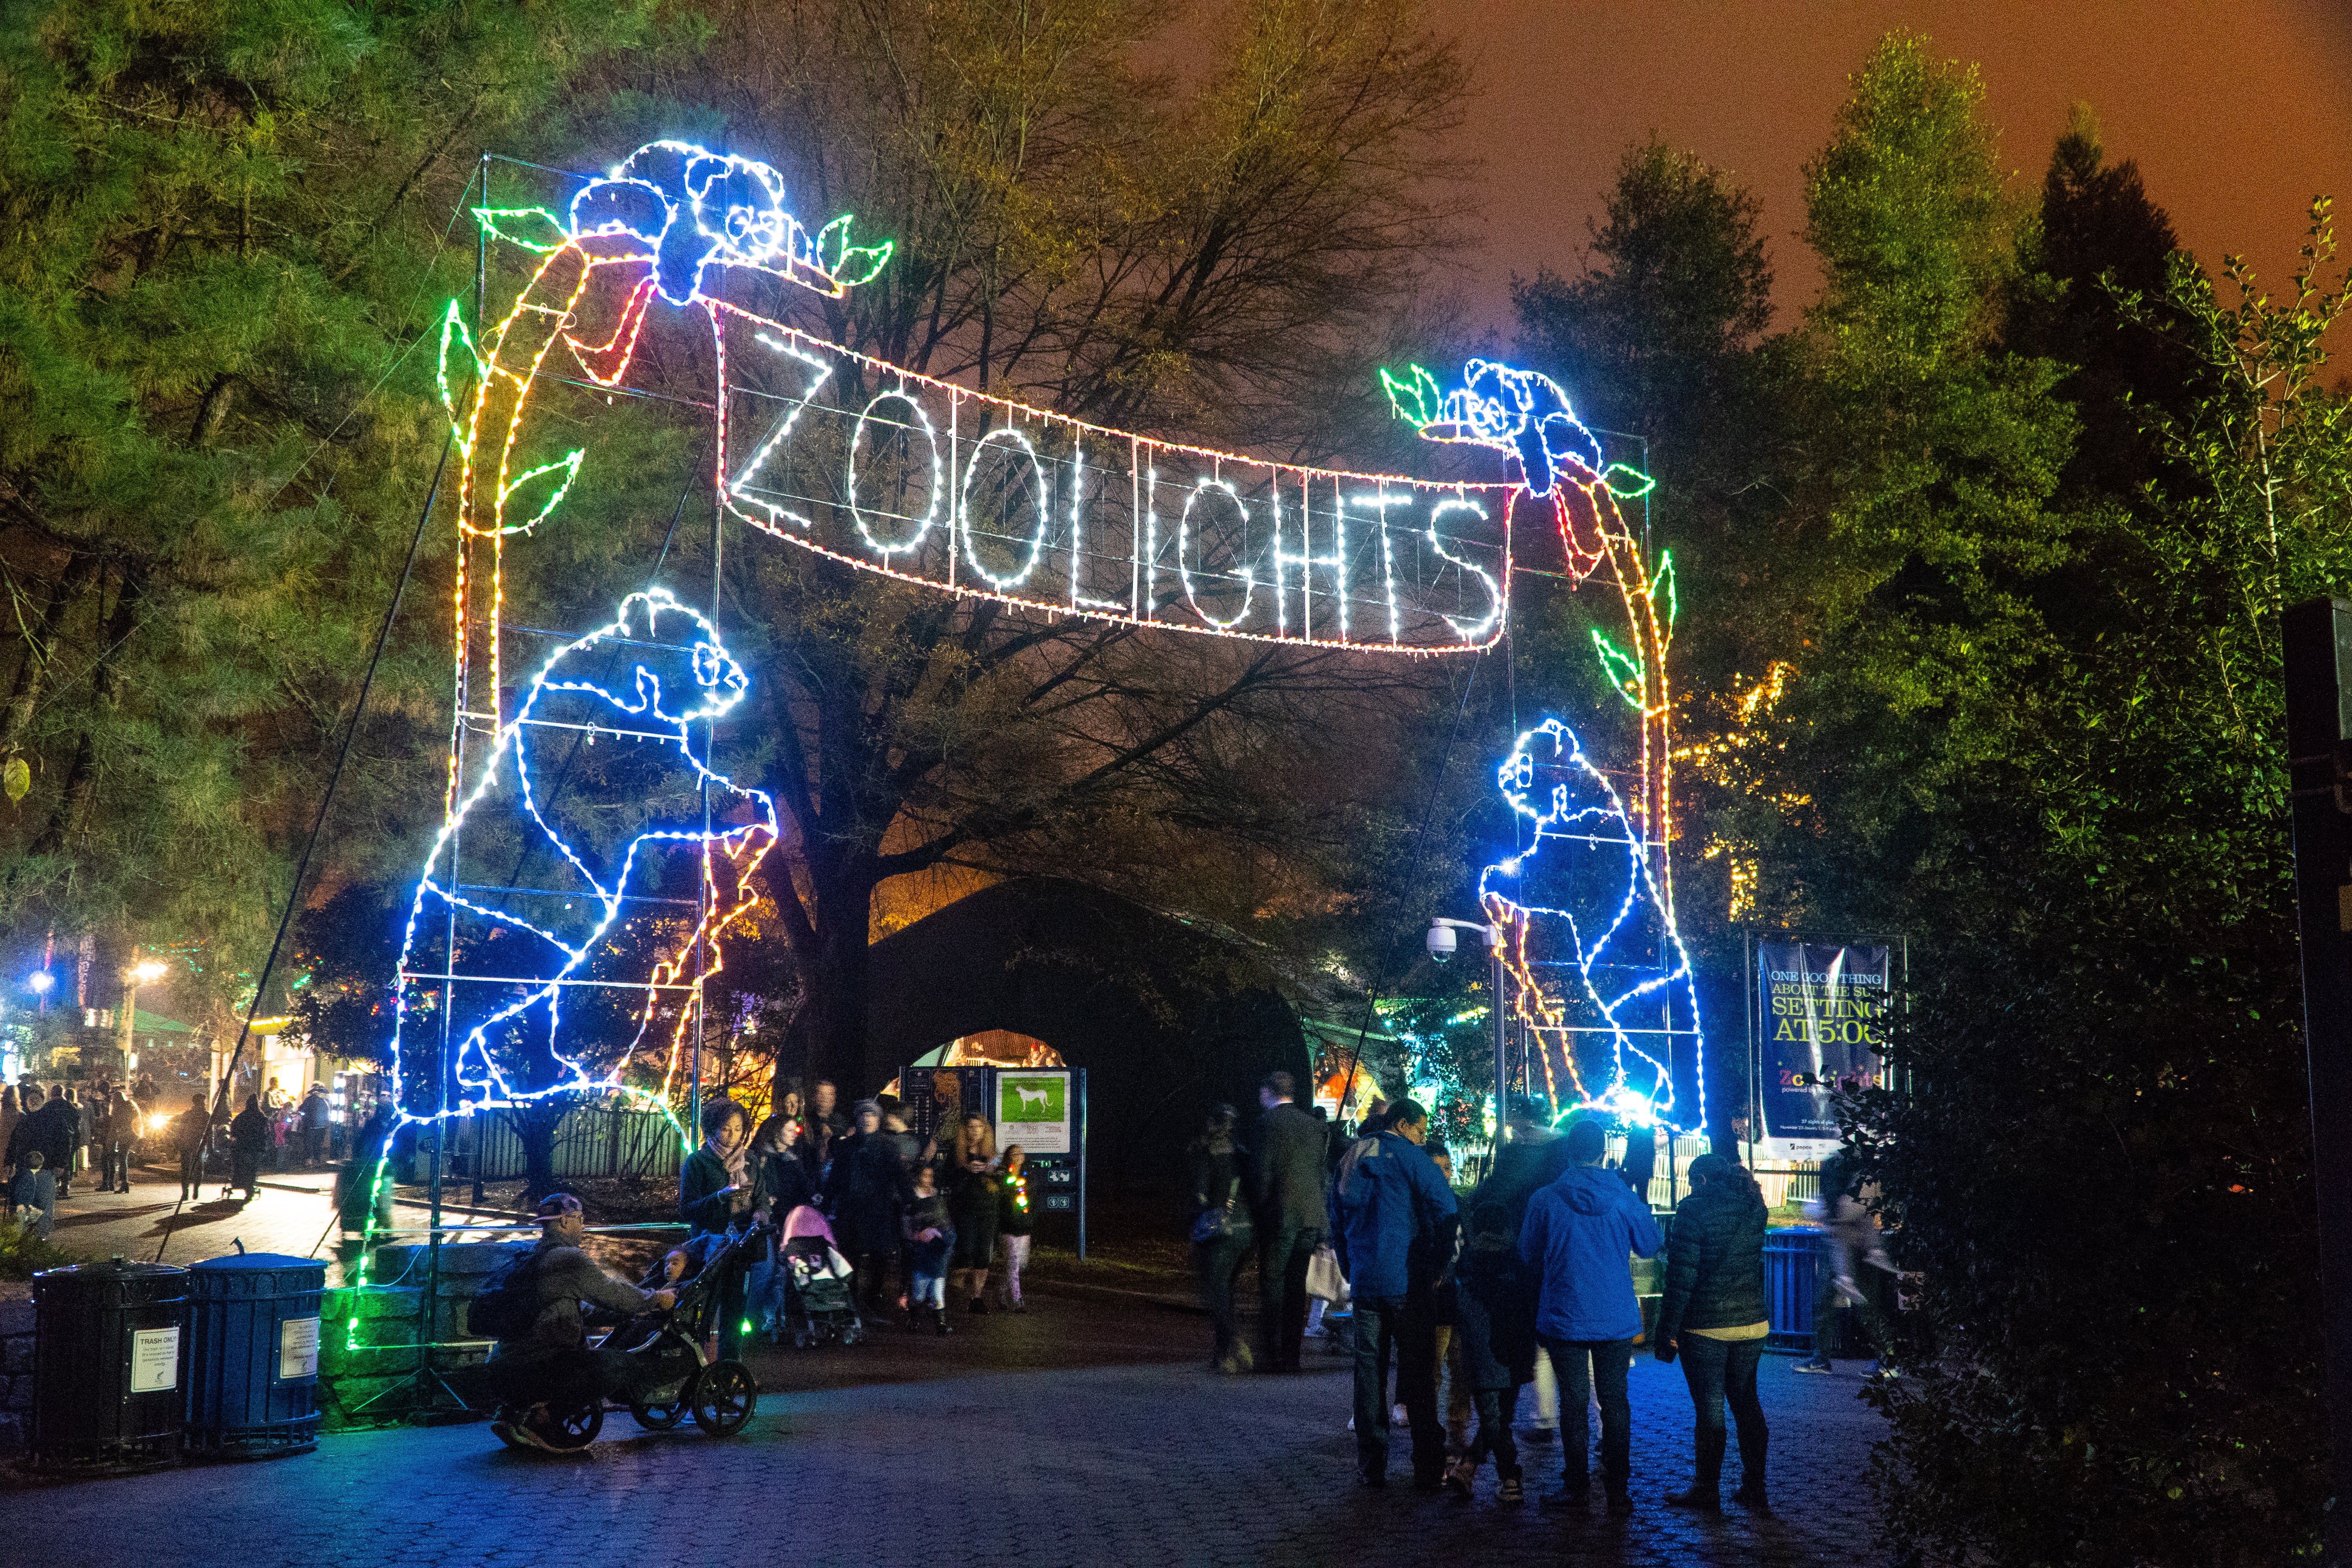 A entry way made of lights and animal silhouettes welcomes visitors into ZooLights. The "banner" across the top reads "ZooLights" and four giant panda silhouettes are arranged along the sides and corners of the banner.